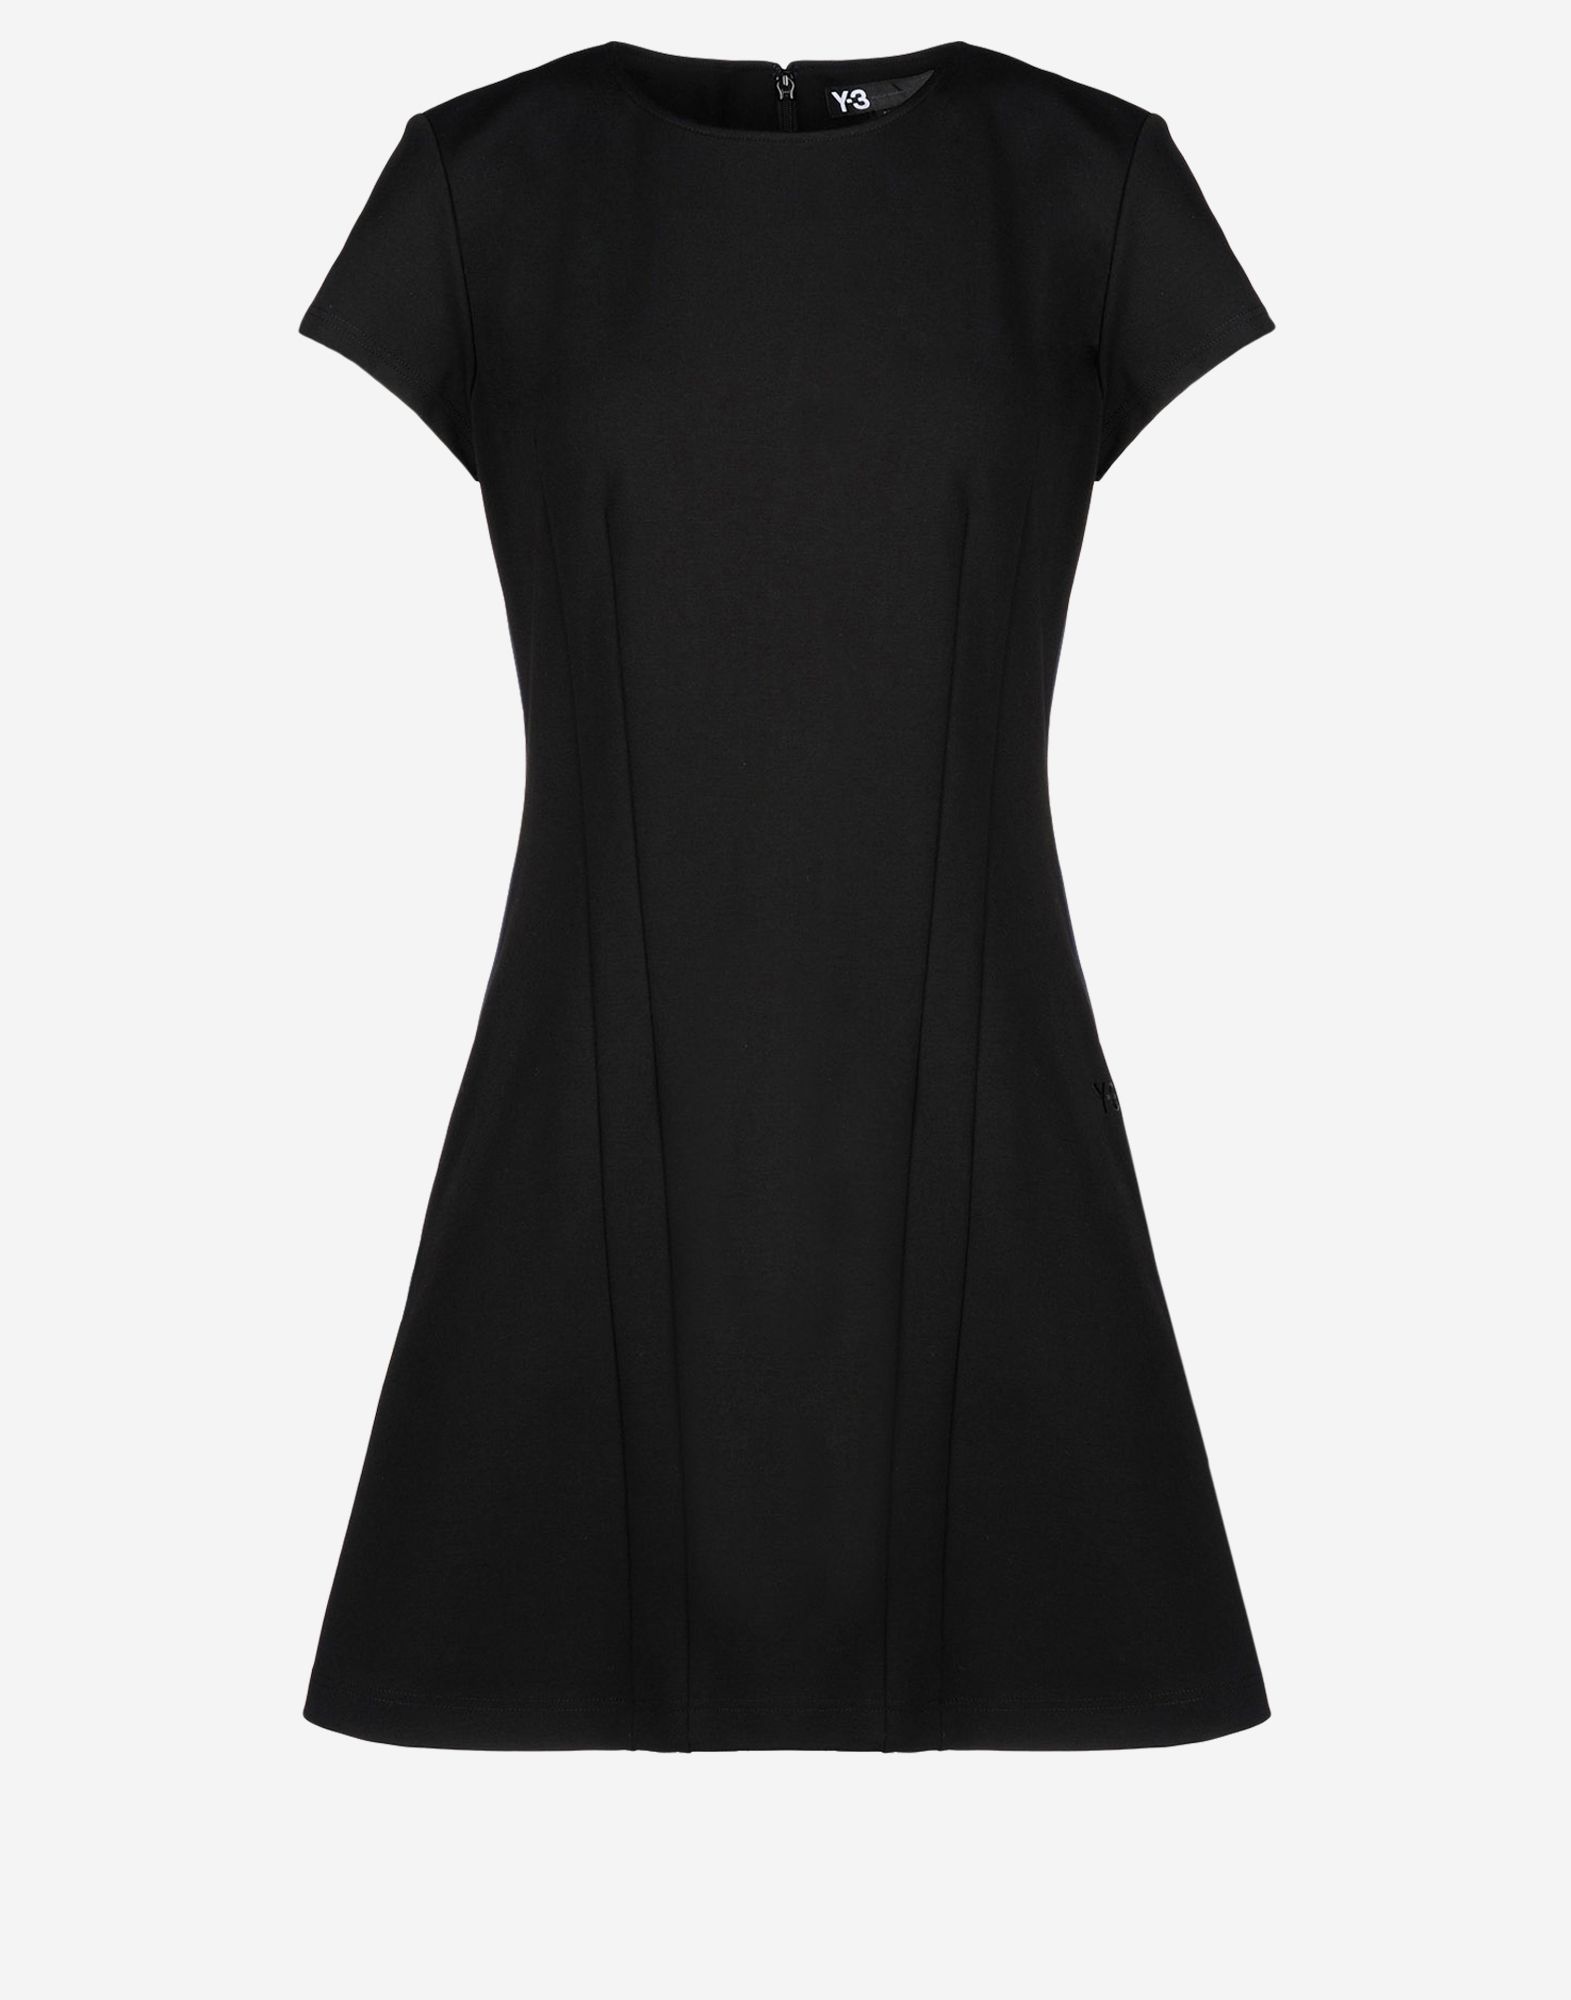 Y 3 Luxe Sculpted Dress for Women | Adidas Y-3 Official Store